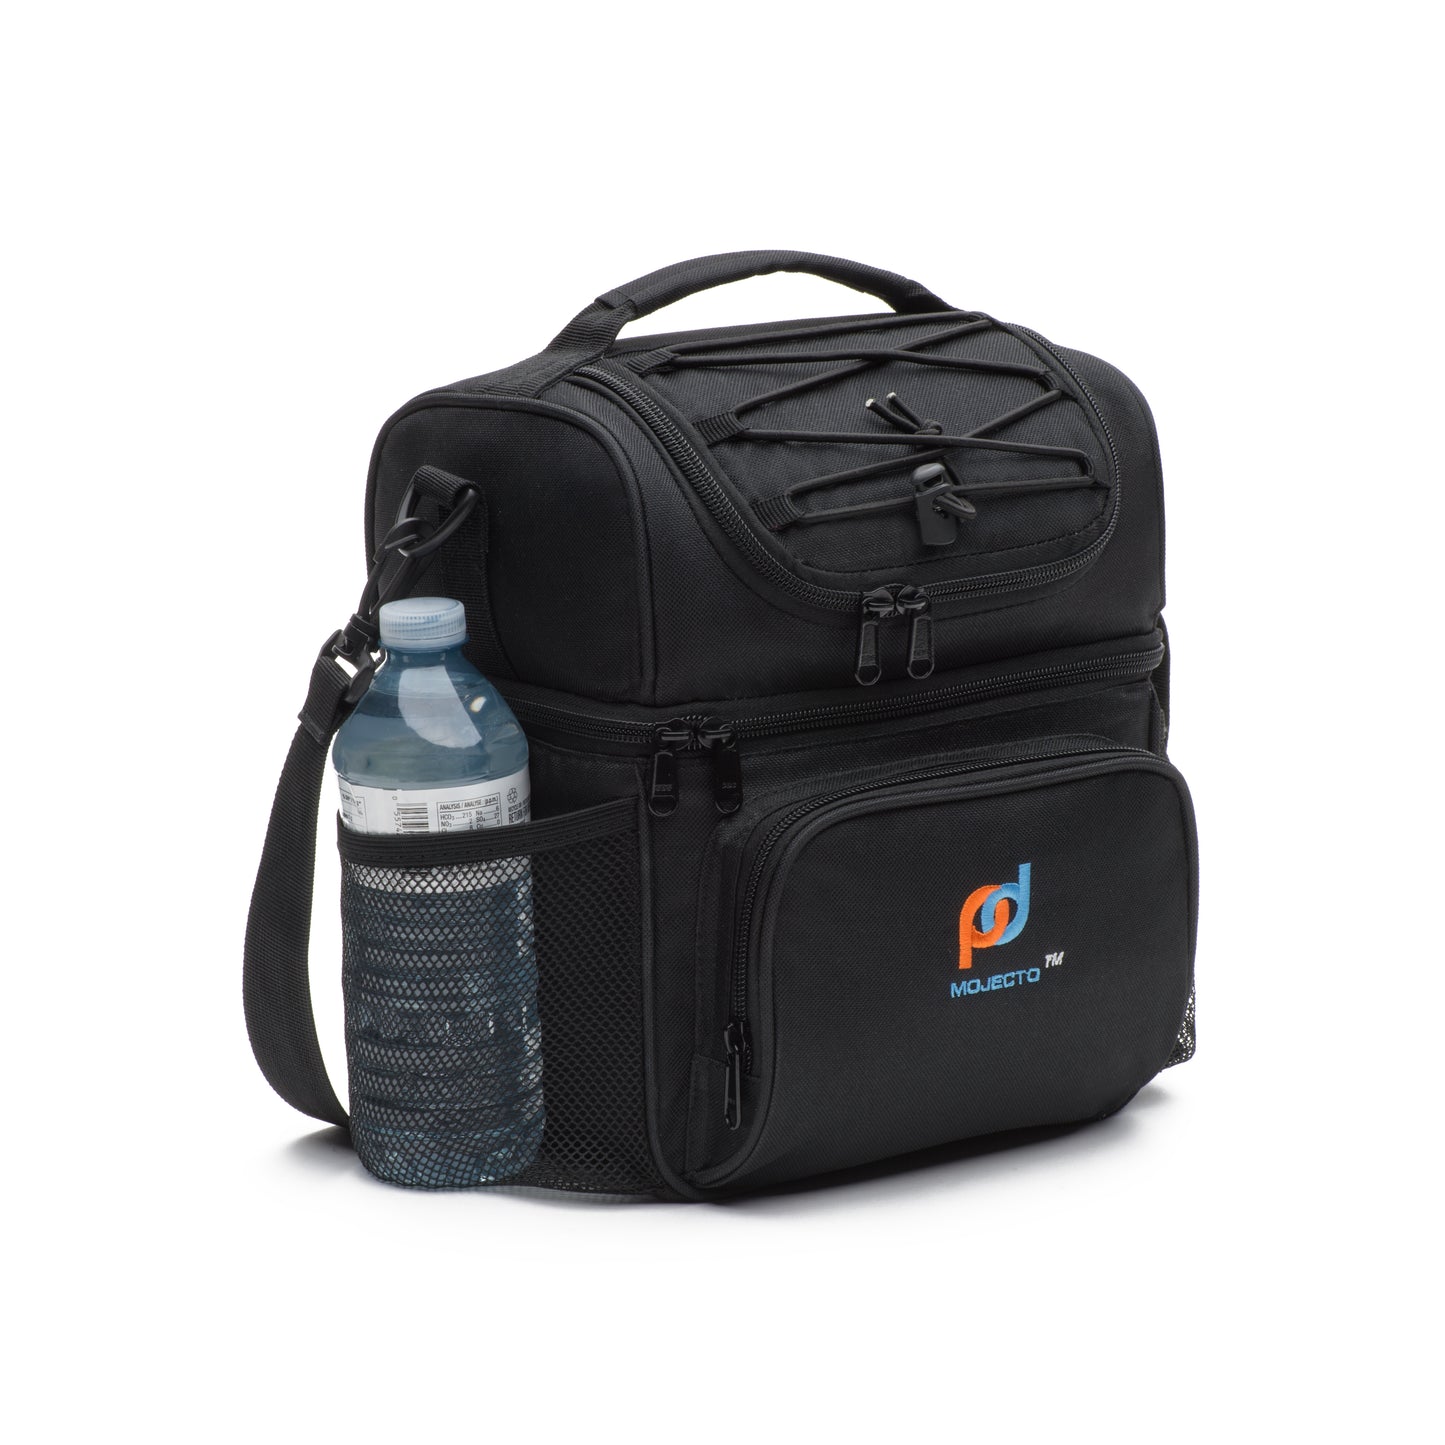 Small Hardliner Cooler Lunch Bag with Leakproof Hard Liner (8.5x6.3x10 In)